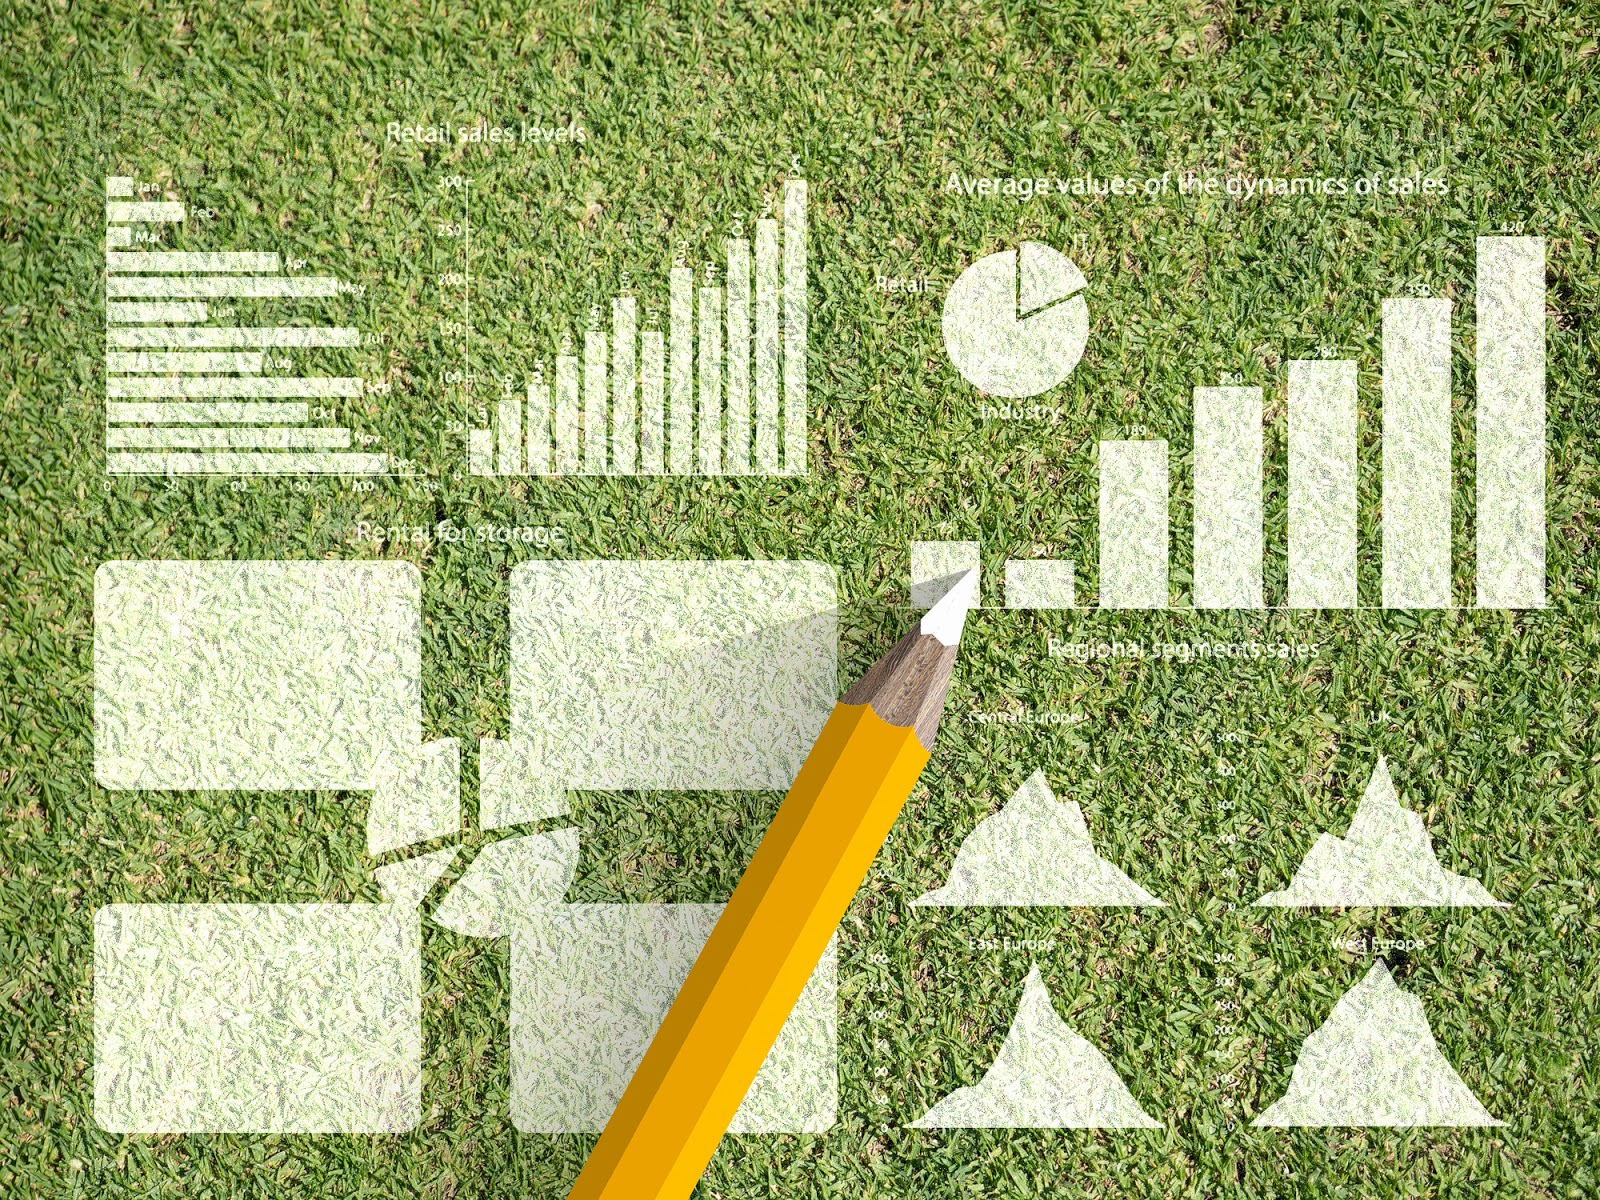 How Landscapers Can Actually Double their Profit Margins|